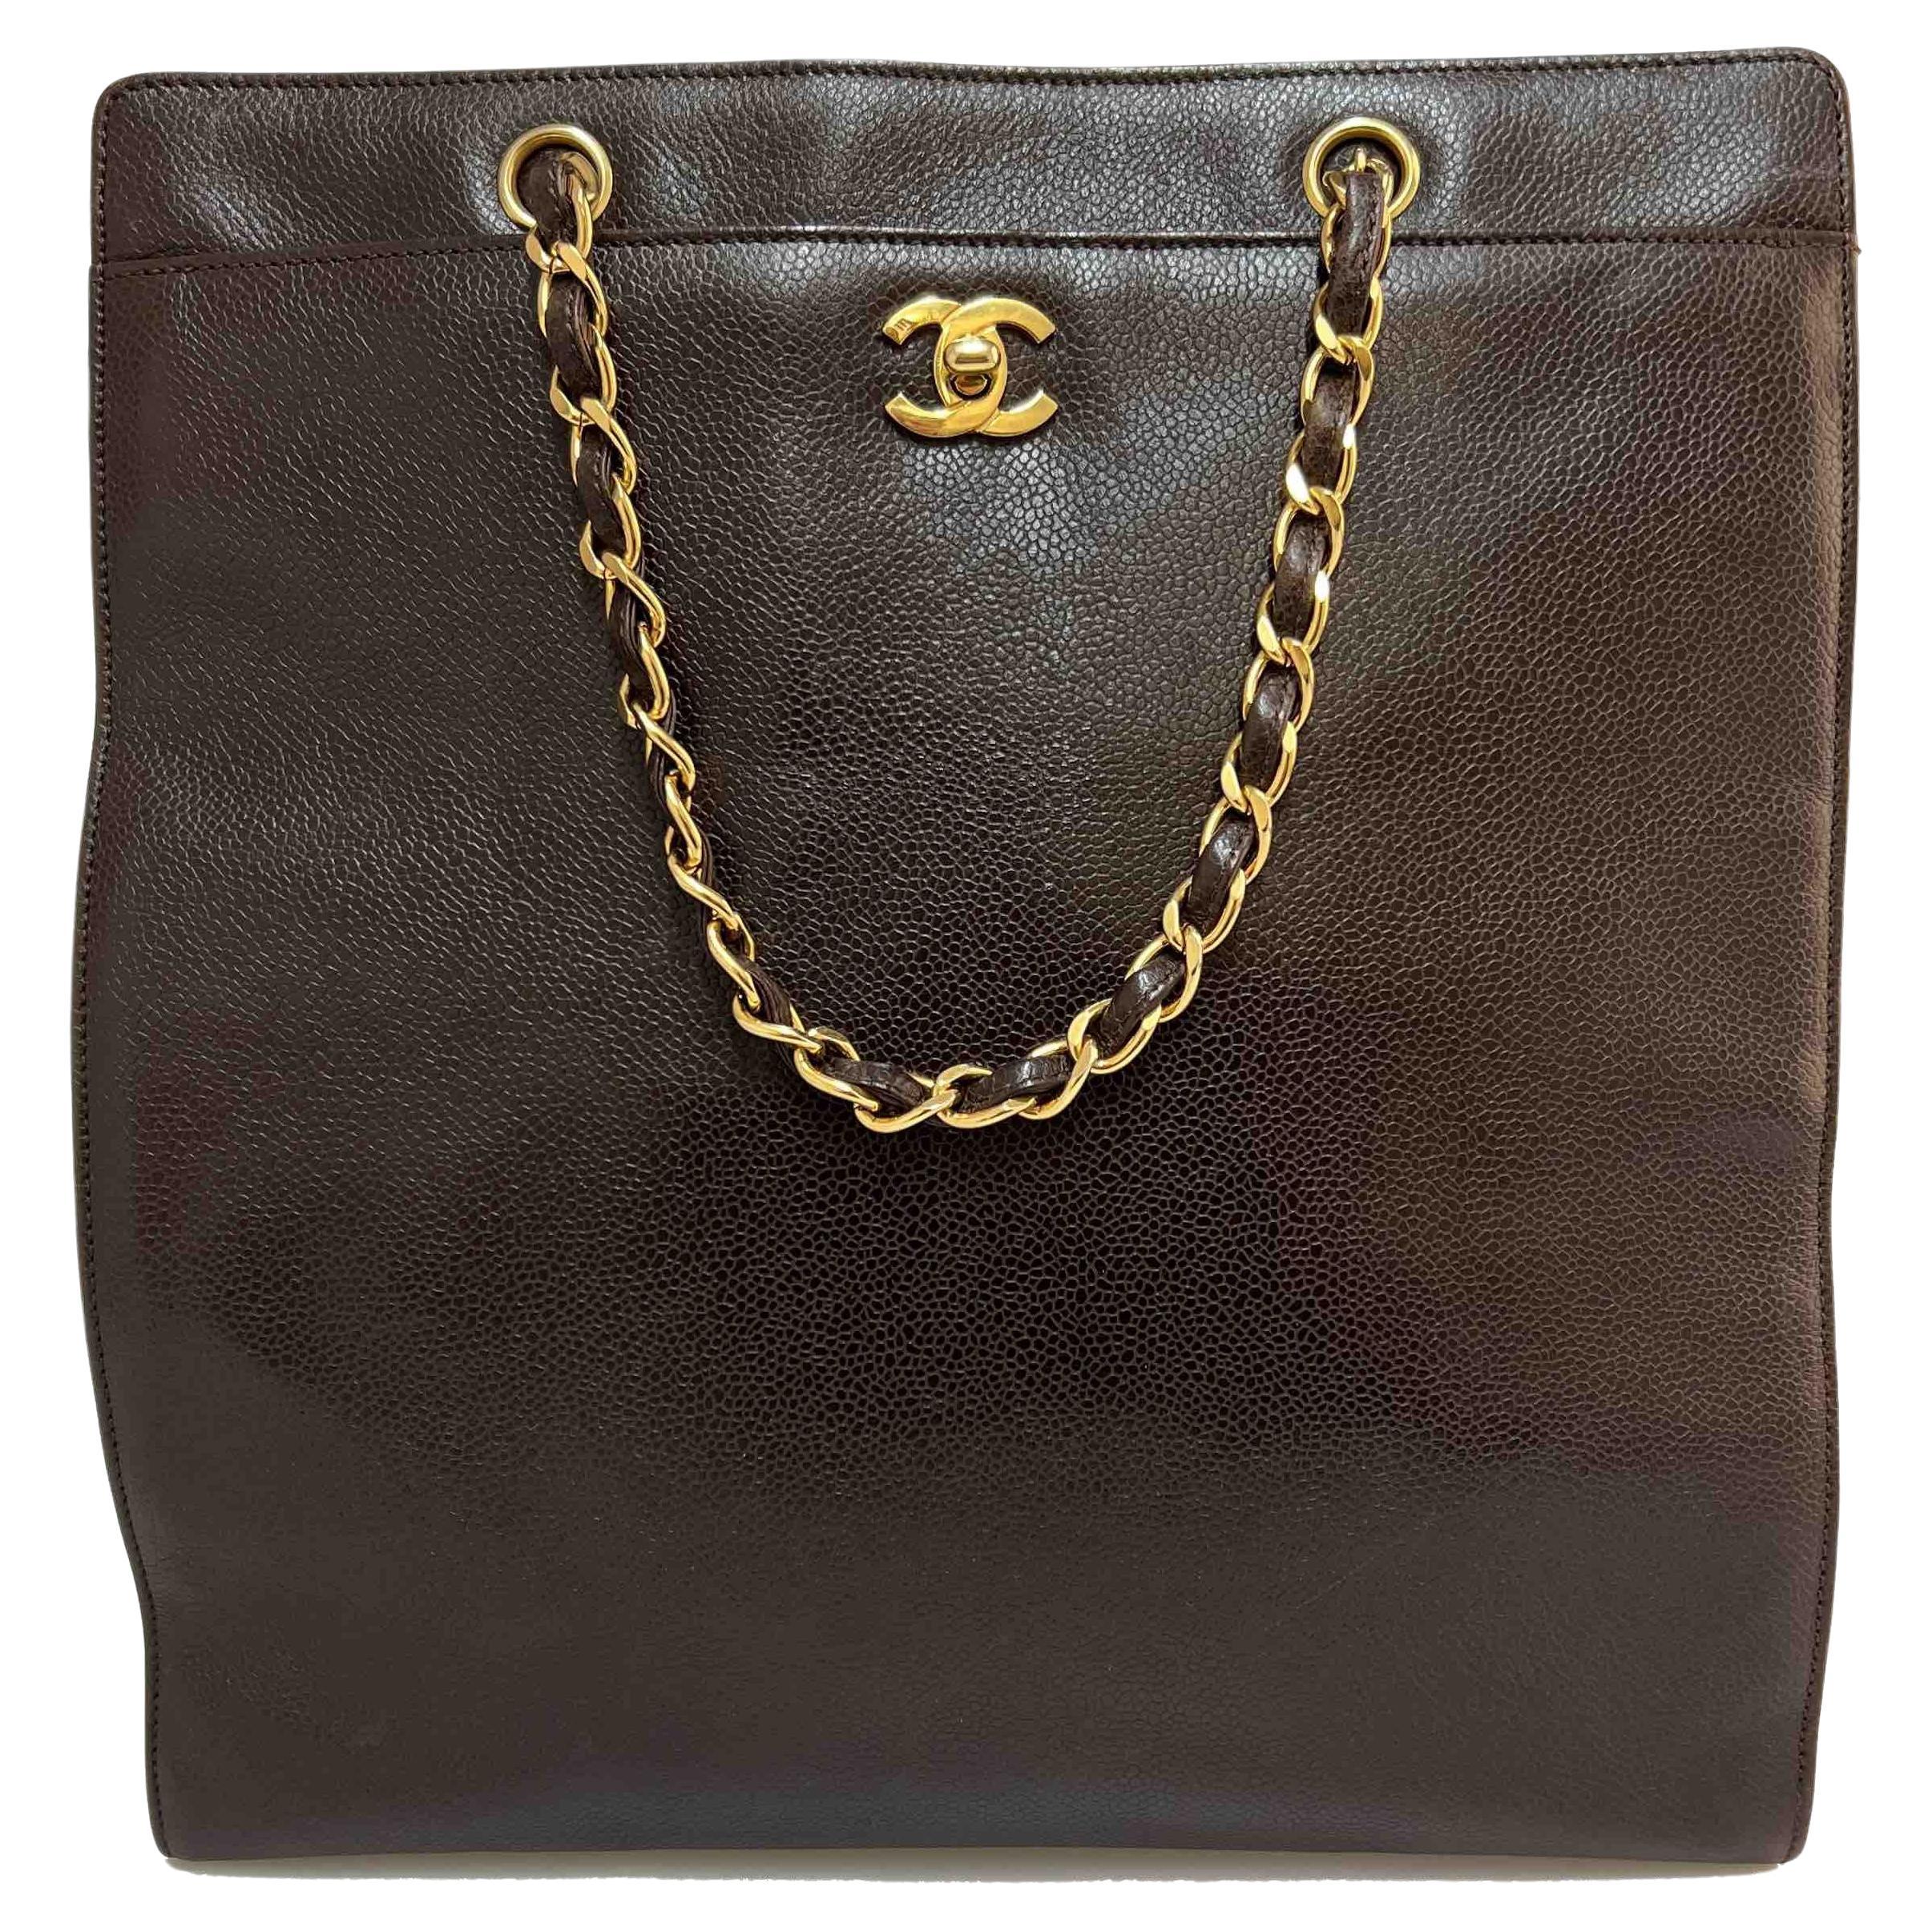 Vintage CHANEL Tote Bag in Brown Grained Leather